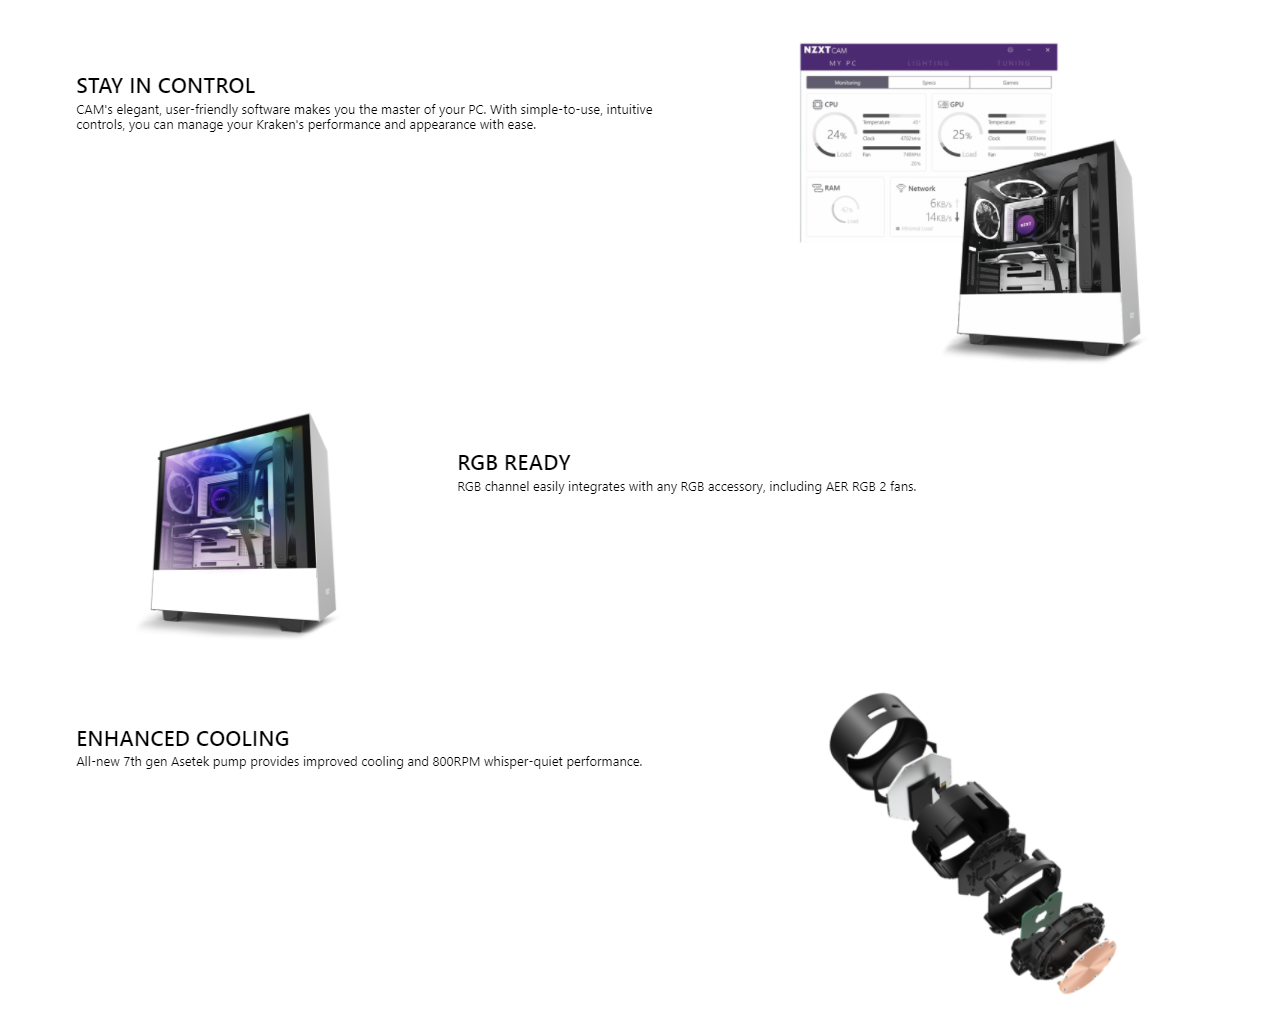 NZXT Kraken Z Series Z73 360mm **LGA 1700 bracket included** - RL-KRZ73-01 - AIO RGB CPU Liquid Cooler - Customizable LCD Display - Improved Pump - Powered by CAM V4 - RGB Connector - Aer P 120mm Radiator Fans (3 Included) LGA 1700 Support